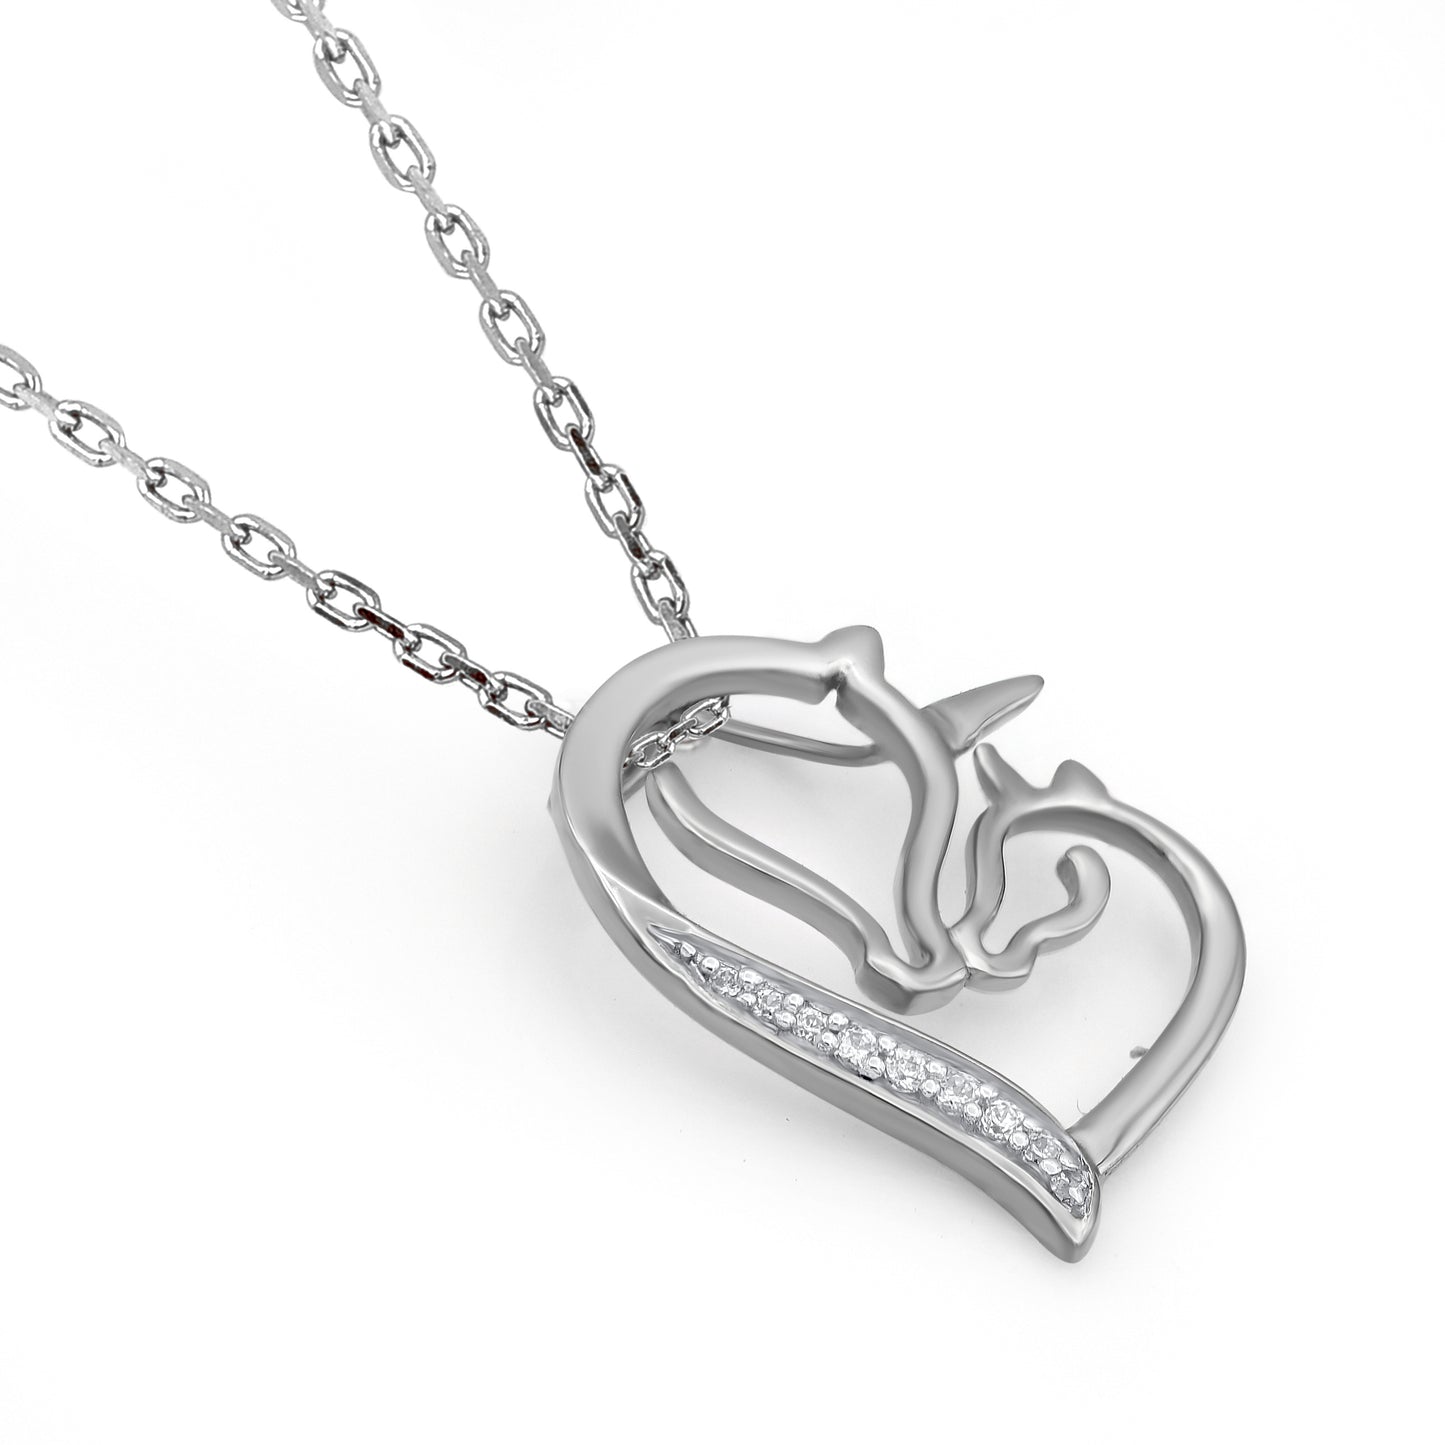 Mama and Baby Unicorn Heart Pendant Necklace in 10K Gold